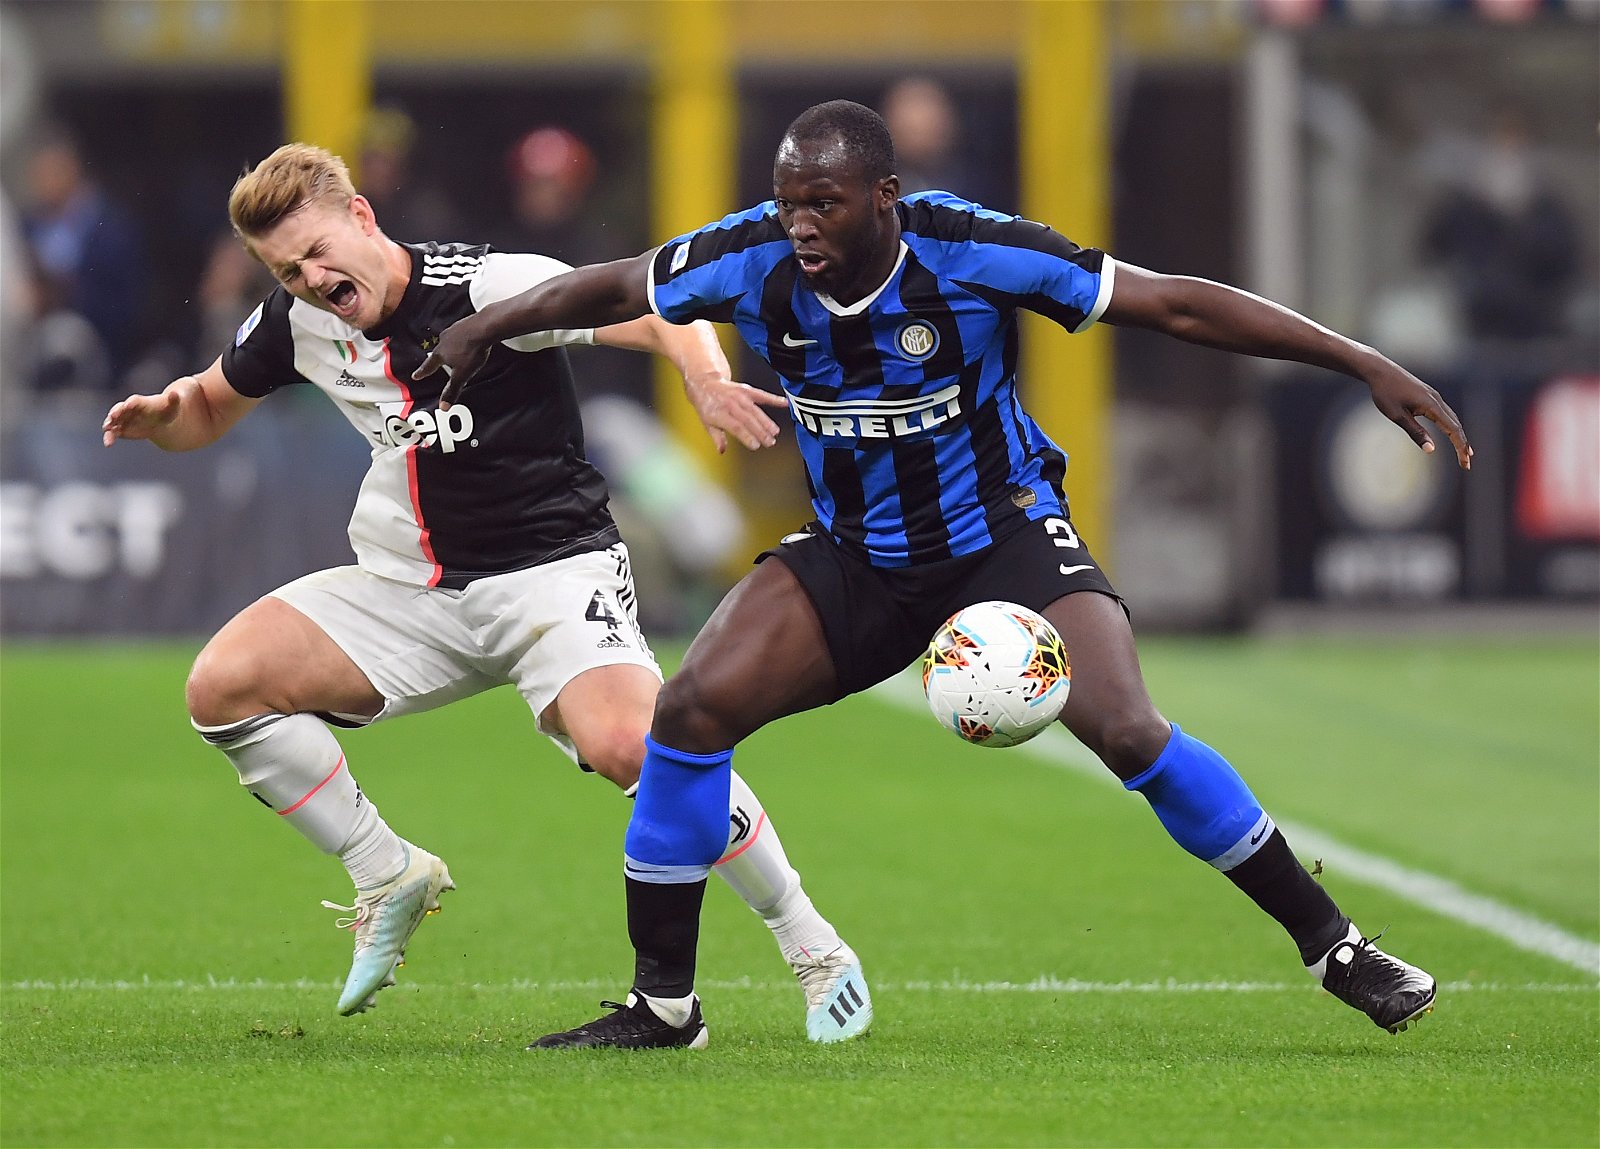 Five things we learned from Inter Milan's clash against Juventus